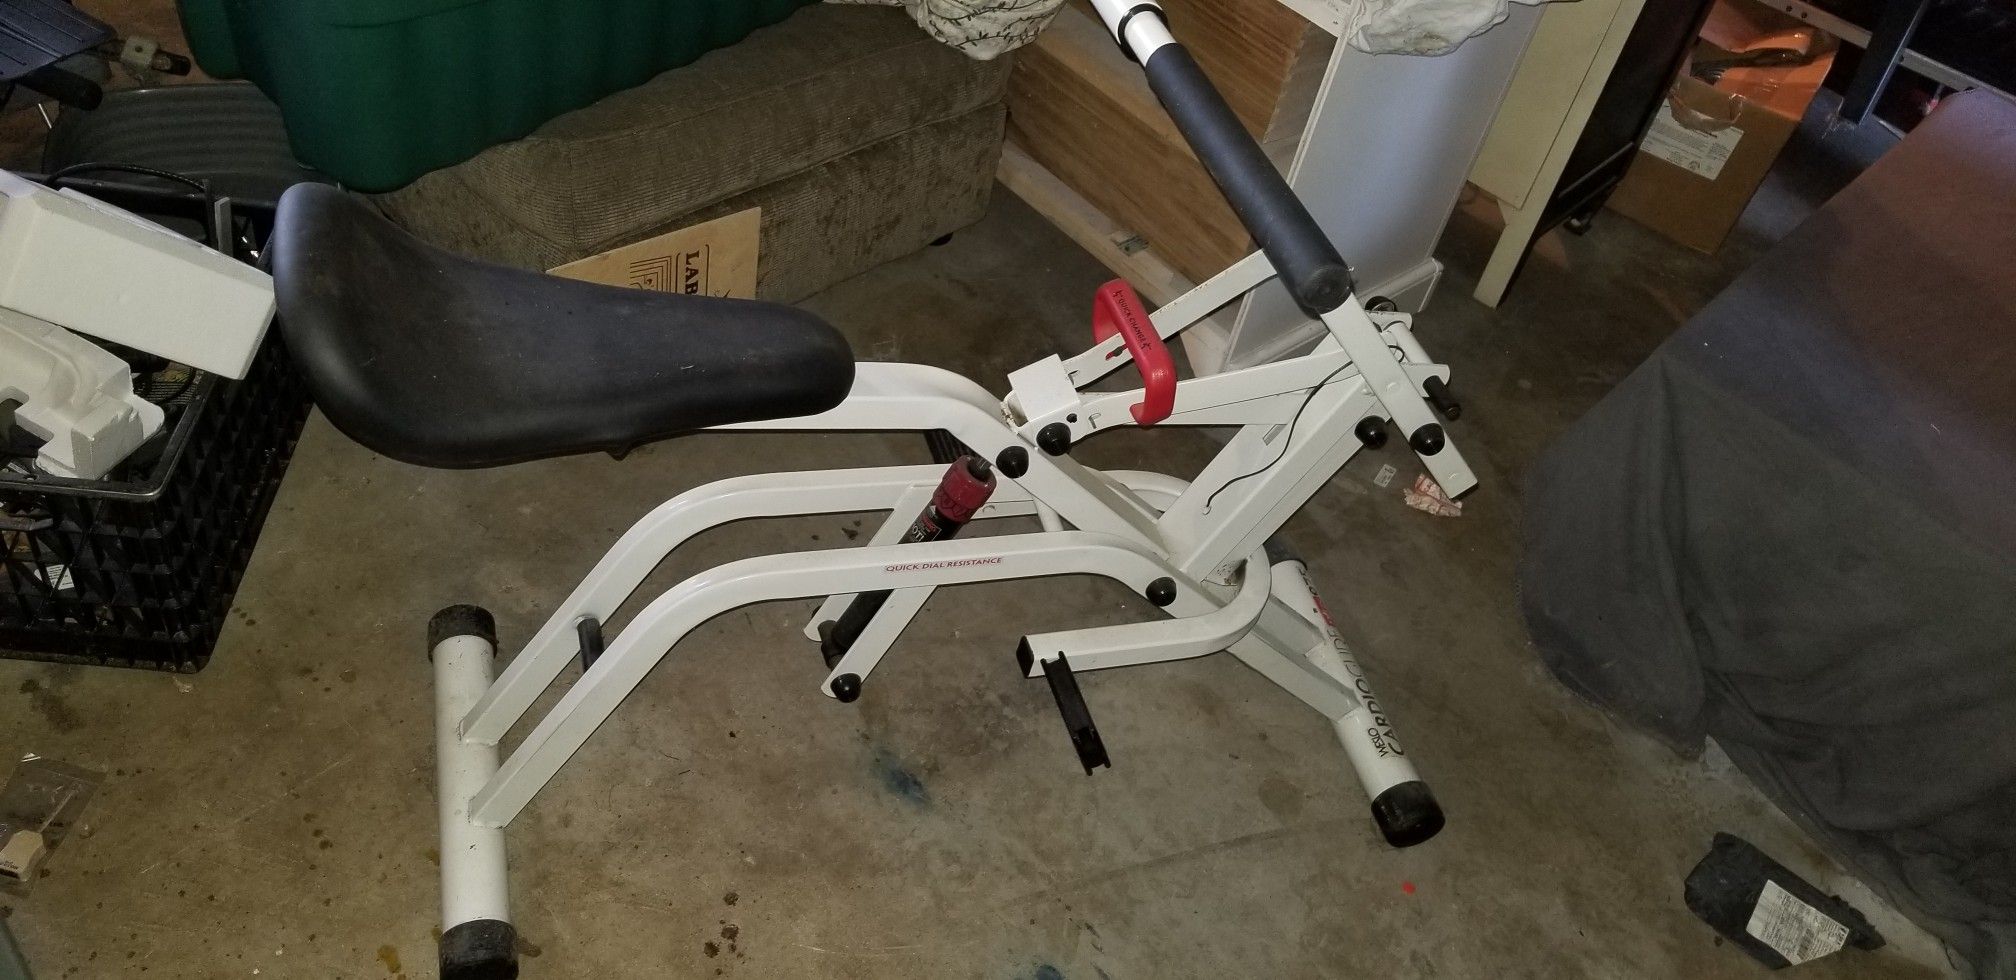 Exercise bike working perfect